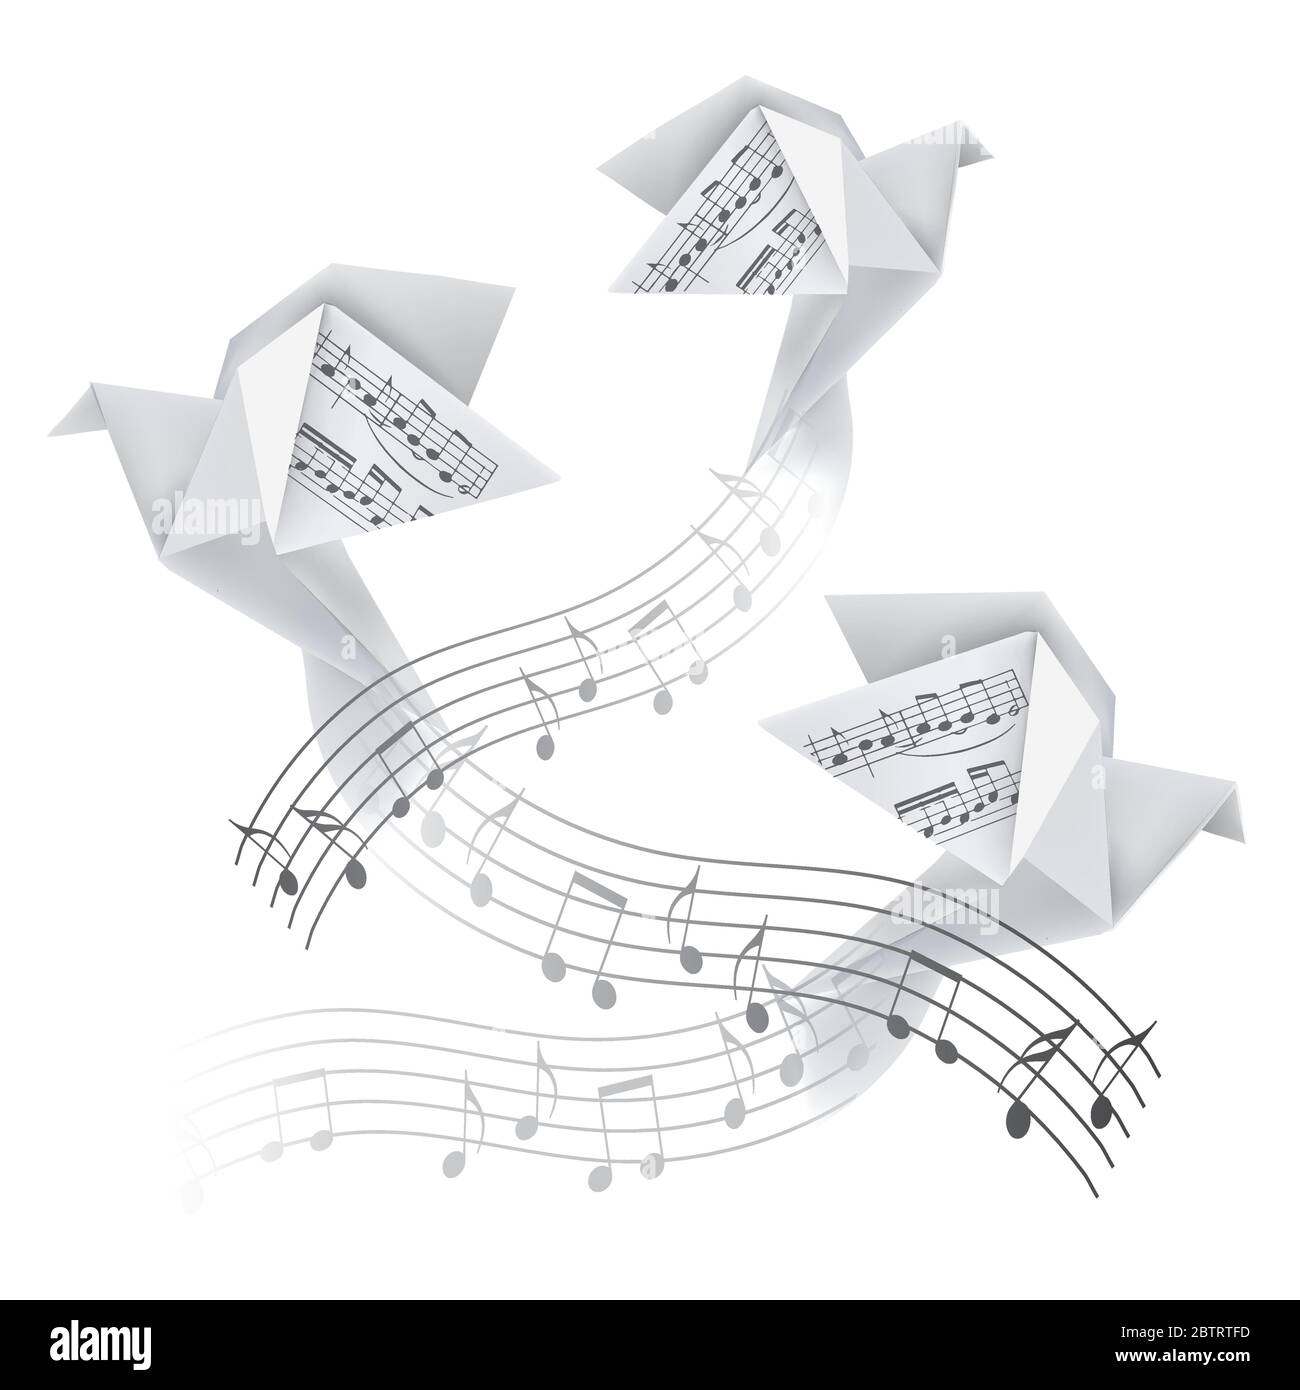 Three Origami doves with musical notes. Stylized illustration of paper pigeons on wave with musical notes. Poetic musical motif. Vector available. Stock Vector